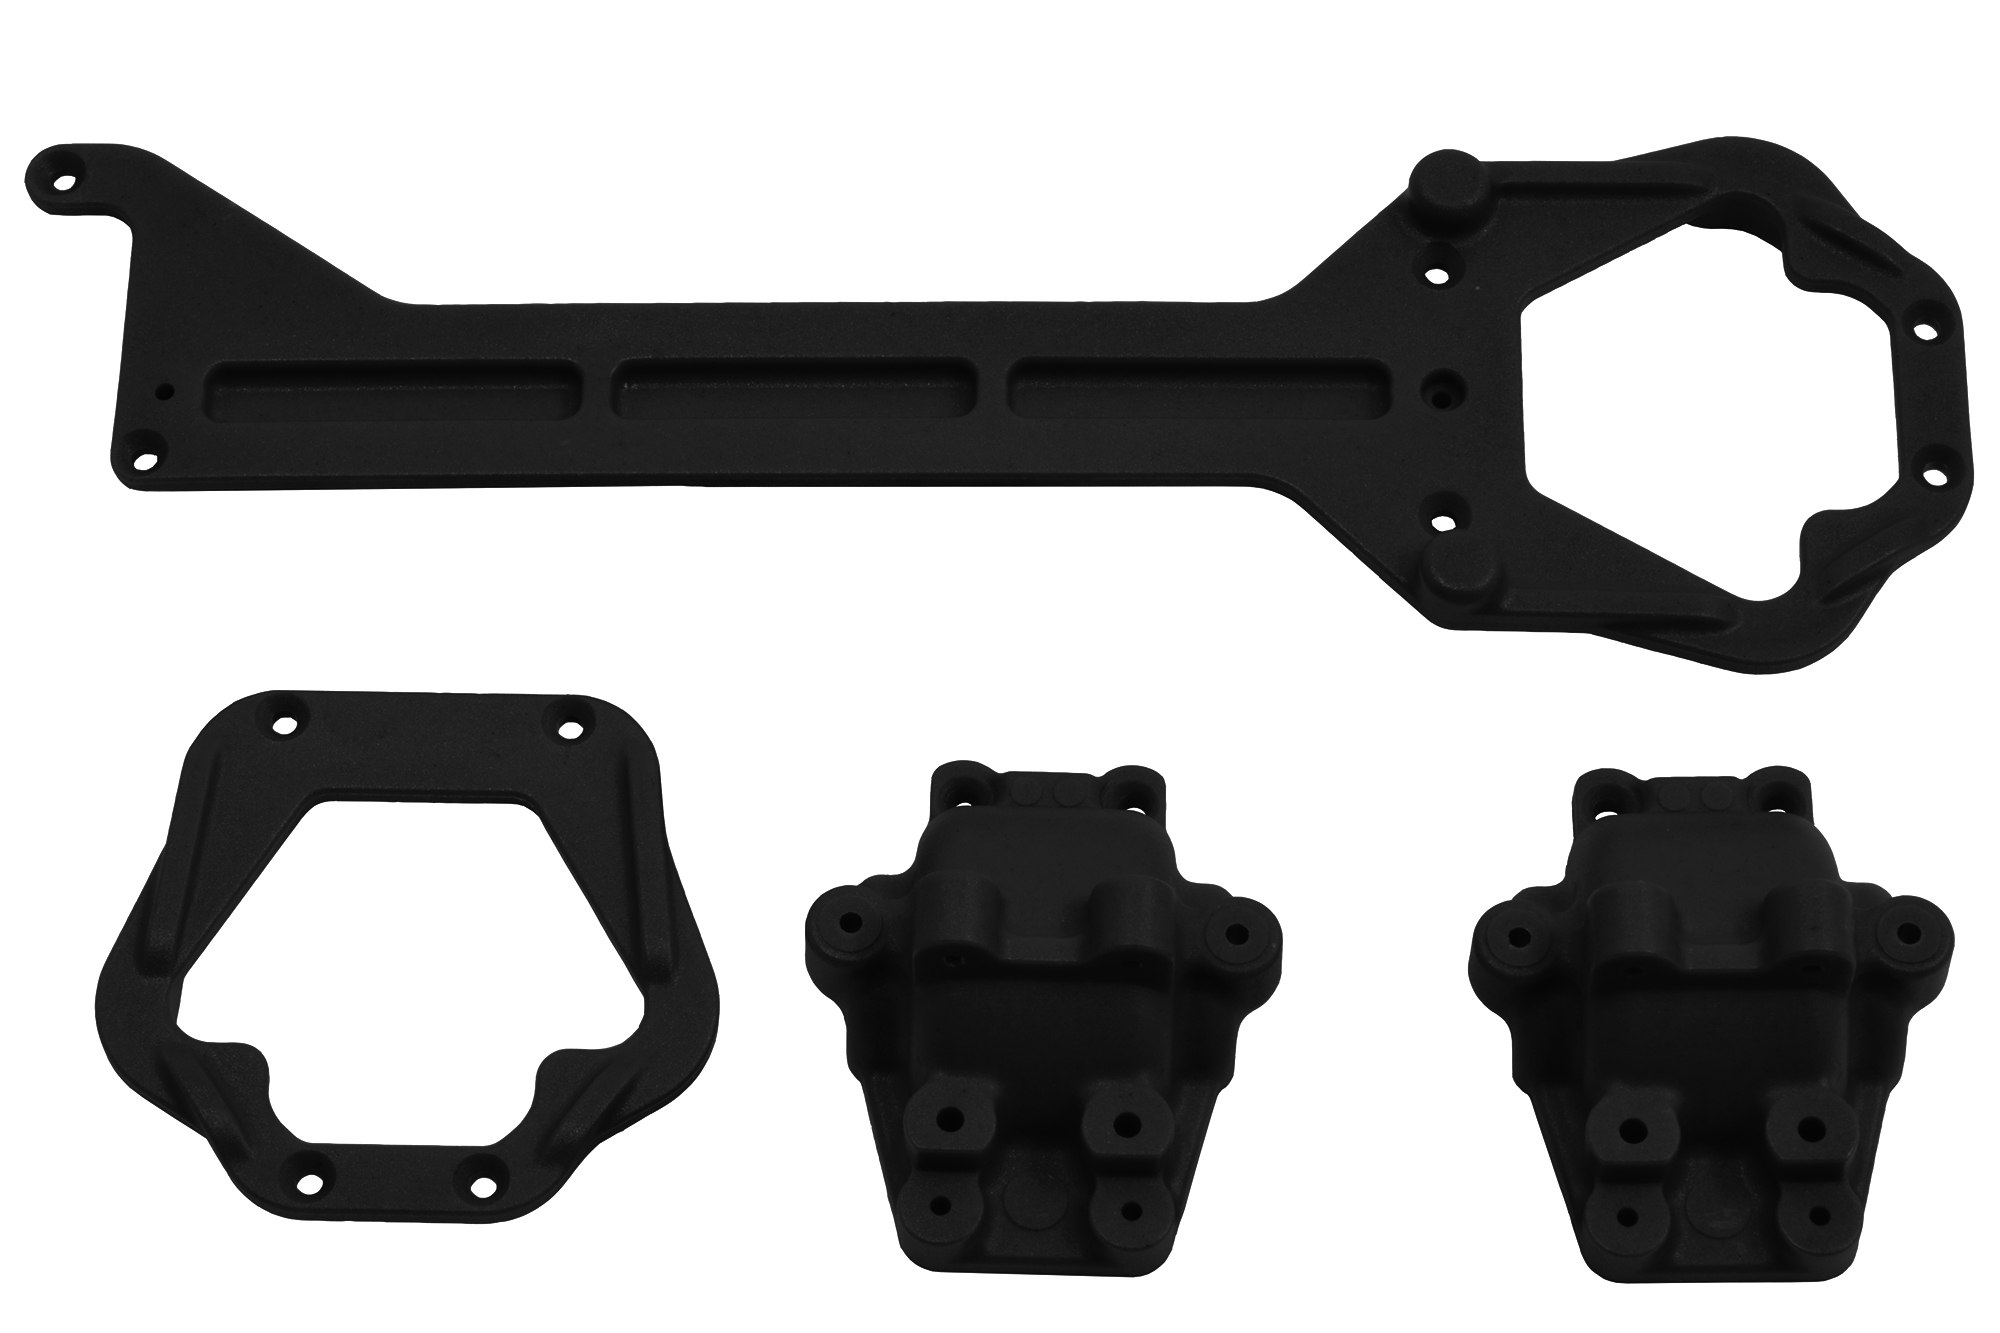 RPM Upper Chassis and Diff Covers For LaTrax Teton & Rally